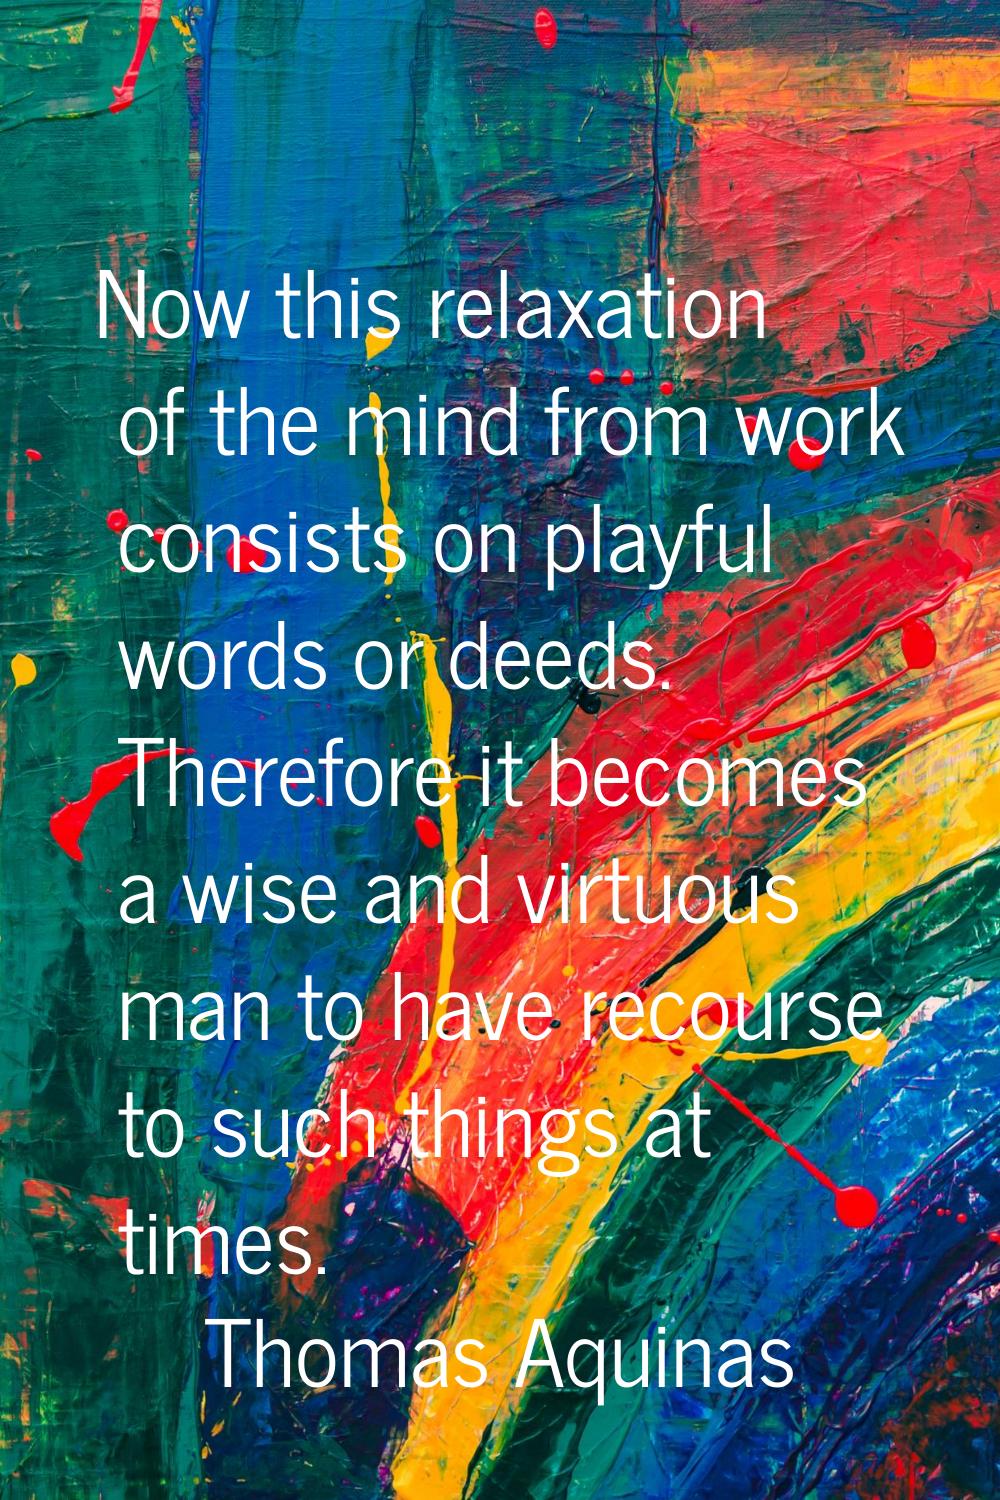 Now this relaxation of the mind from work consists on playful words or deeds. Therefore it becomes 